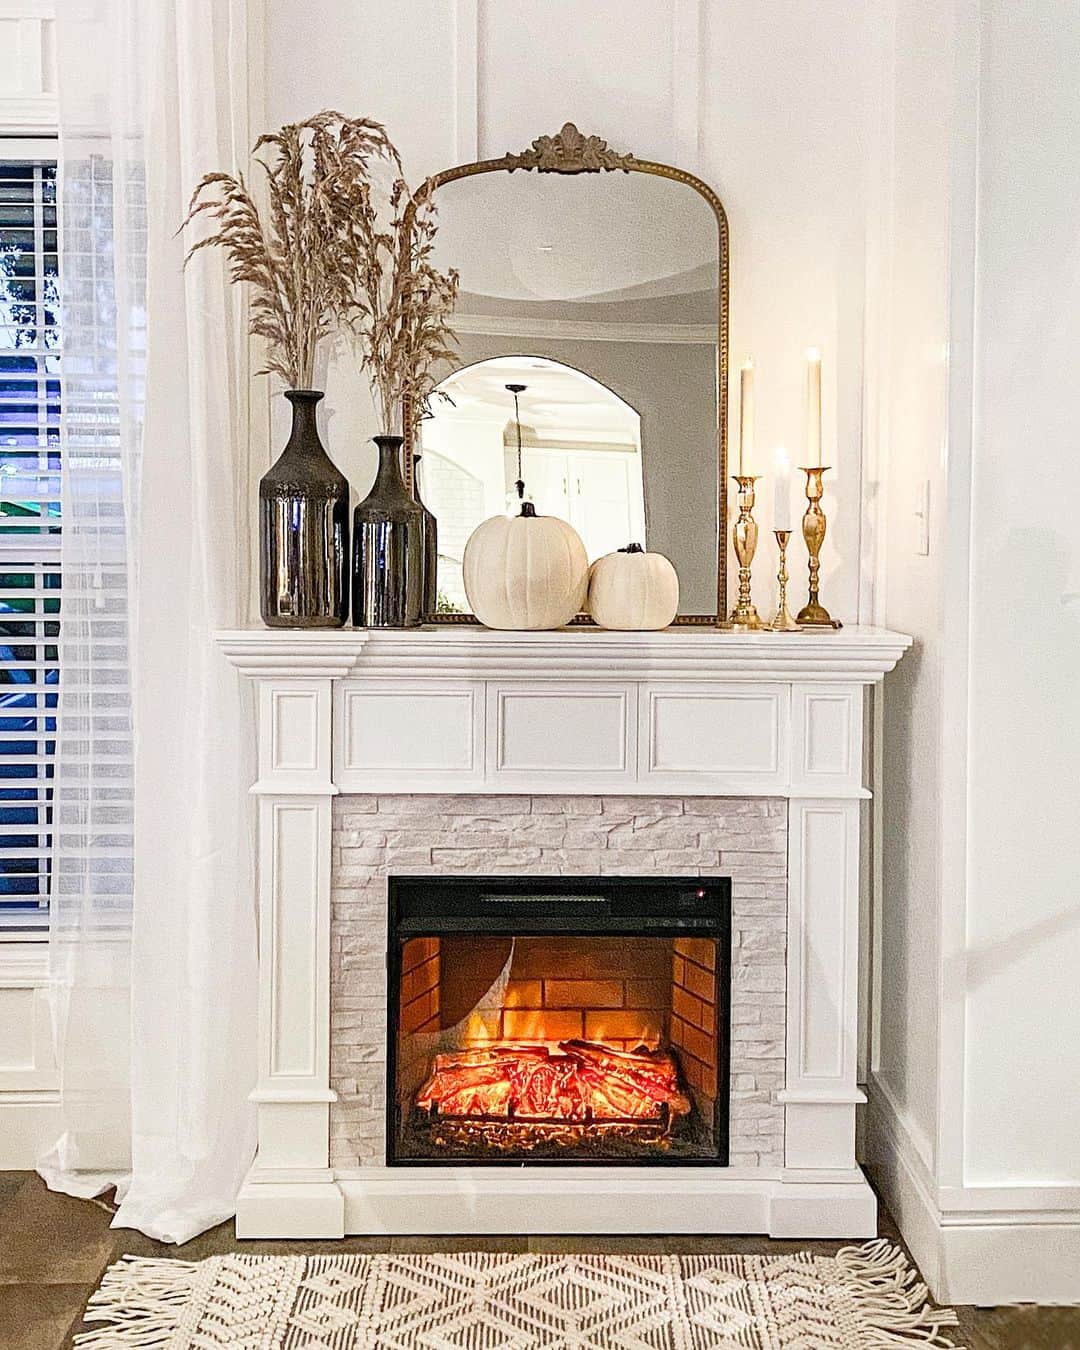 Decorative Logs - Make Your Fireplace Look Great